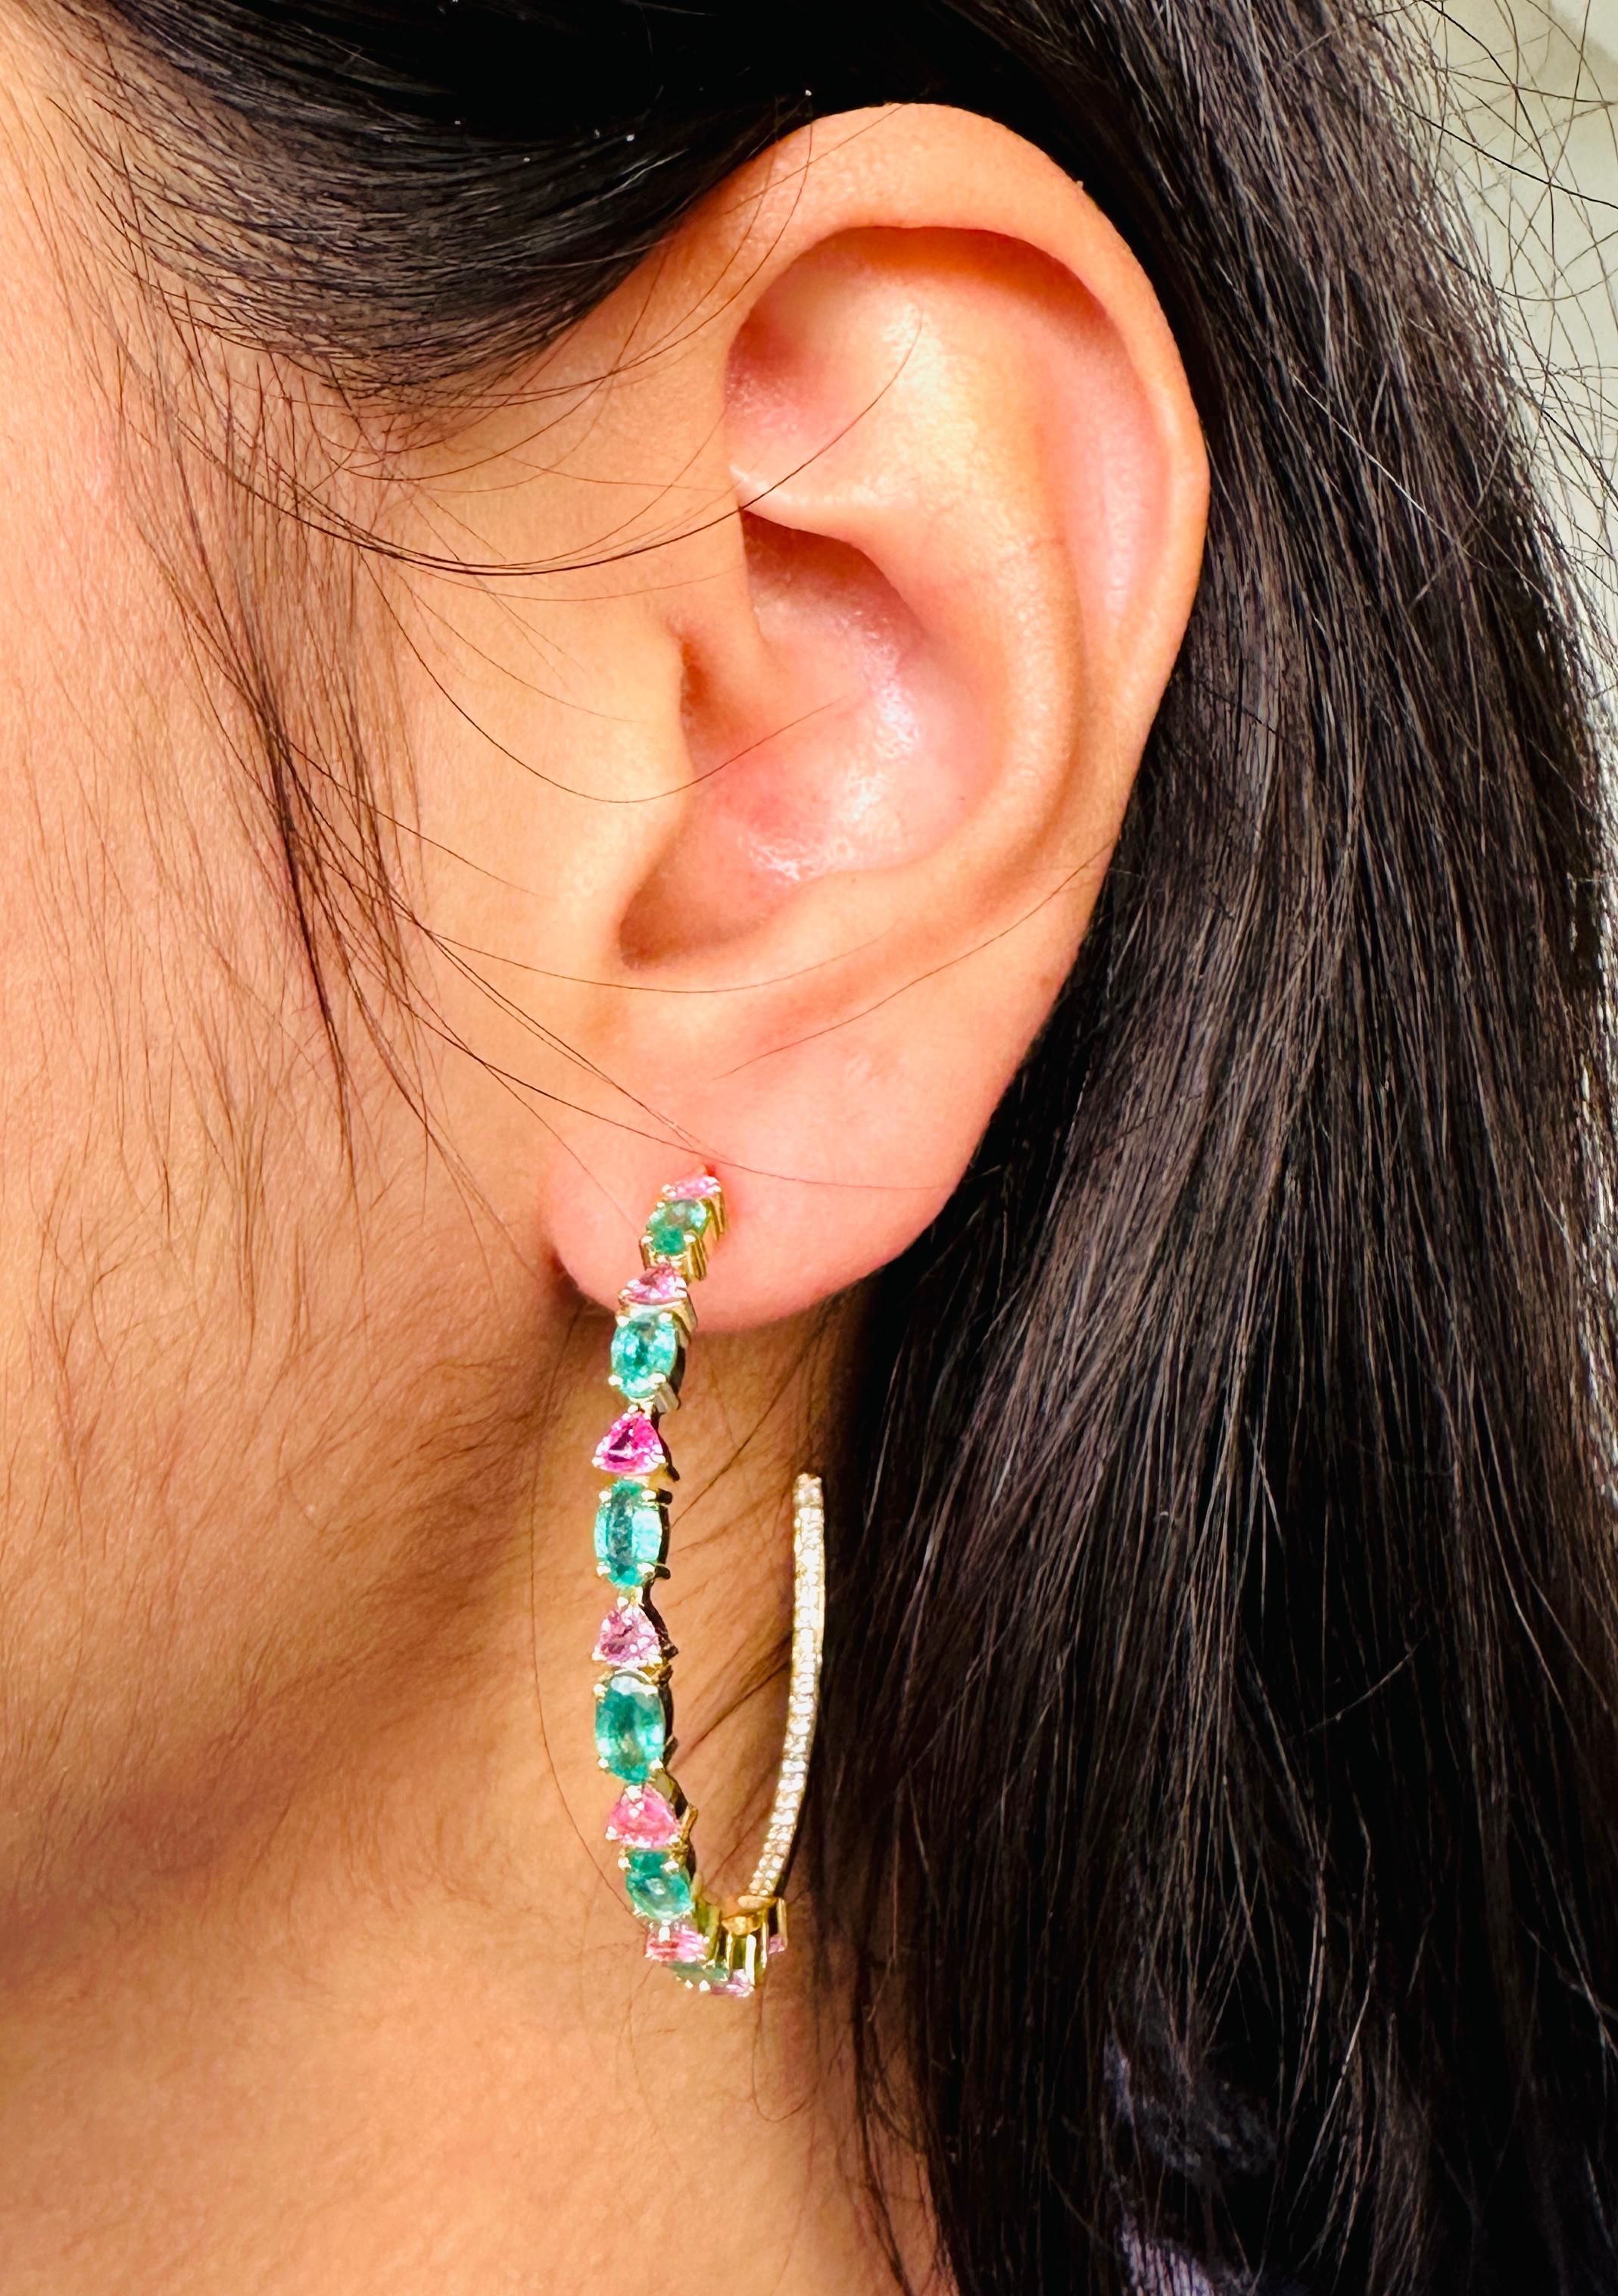 Statement Fine Diamond Emerald and Pink Sapphire Hoop Earrings in 14K Gold to make a statement with your look. You shall need open hoop earrings to make a statement with your look. These earrings create a sparkling, luxurious look featuring oval and